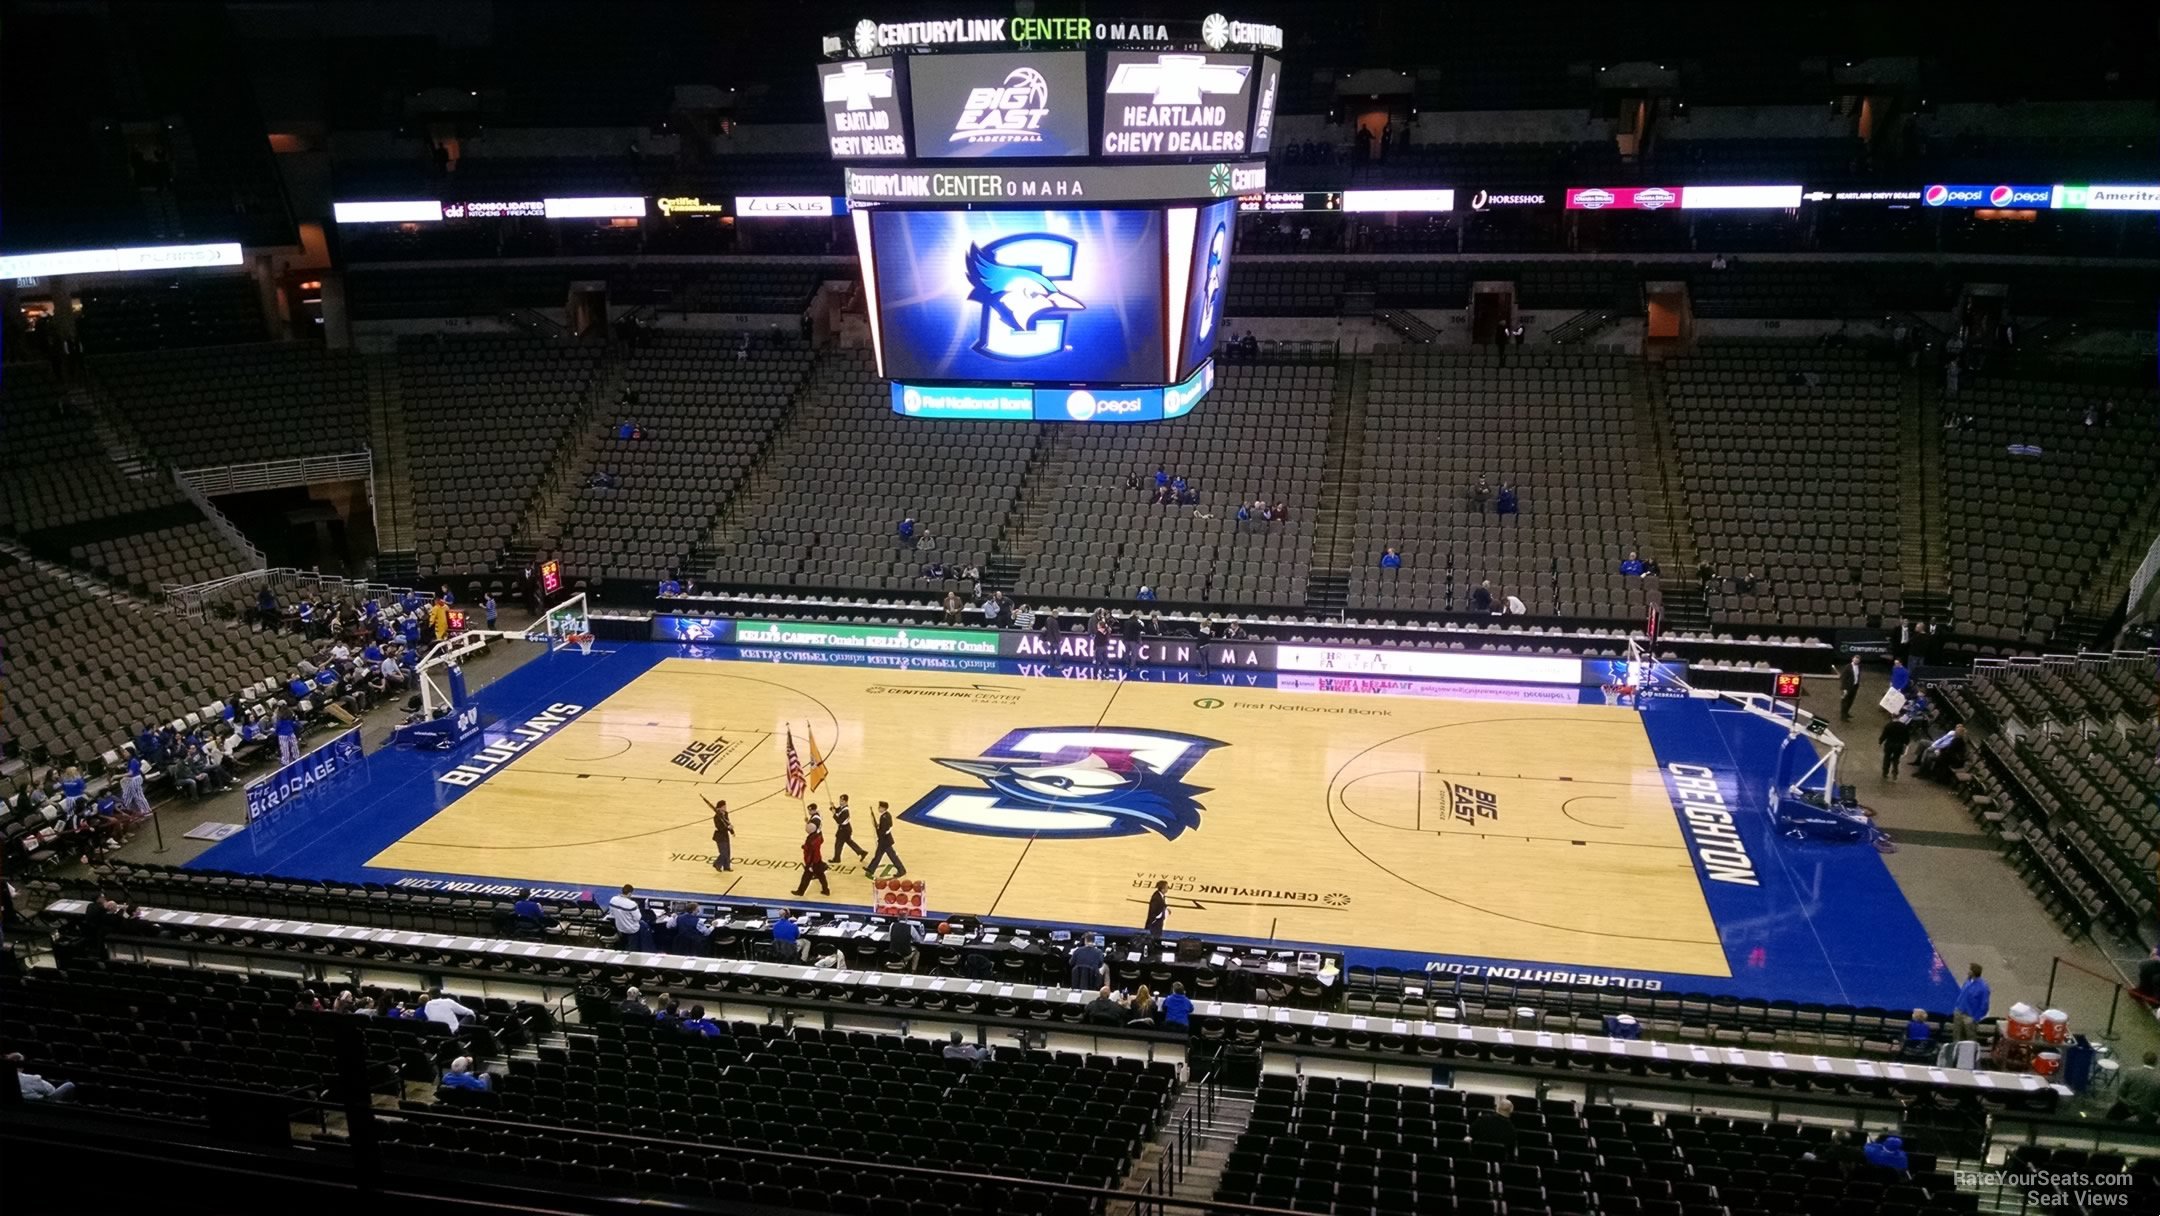 section 220, row c seat view  for basketball - chi health center omaha